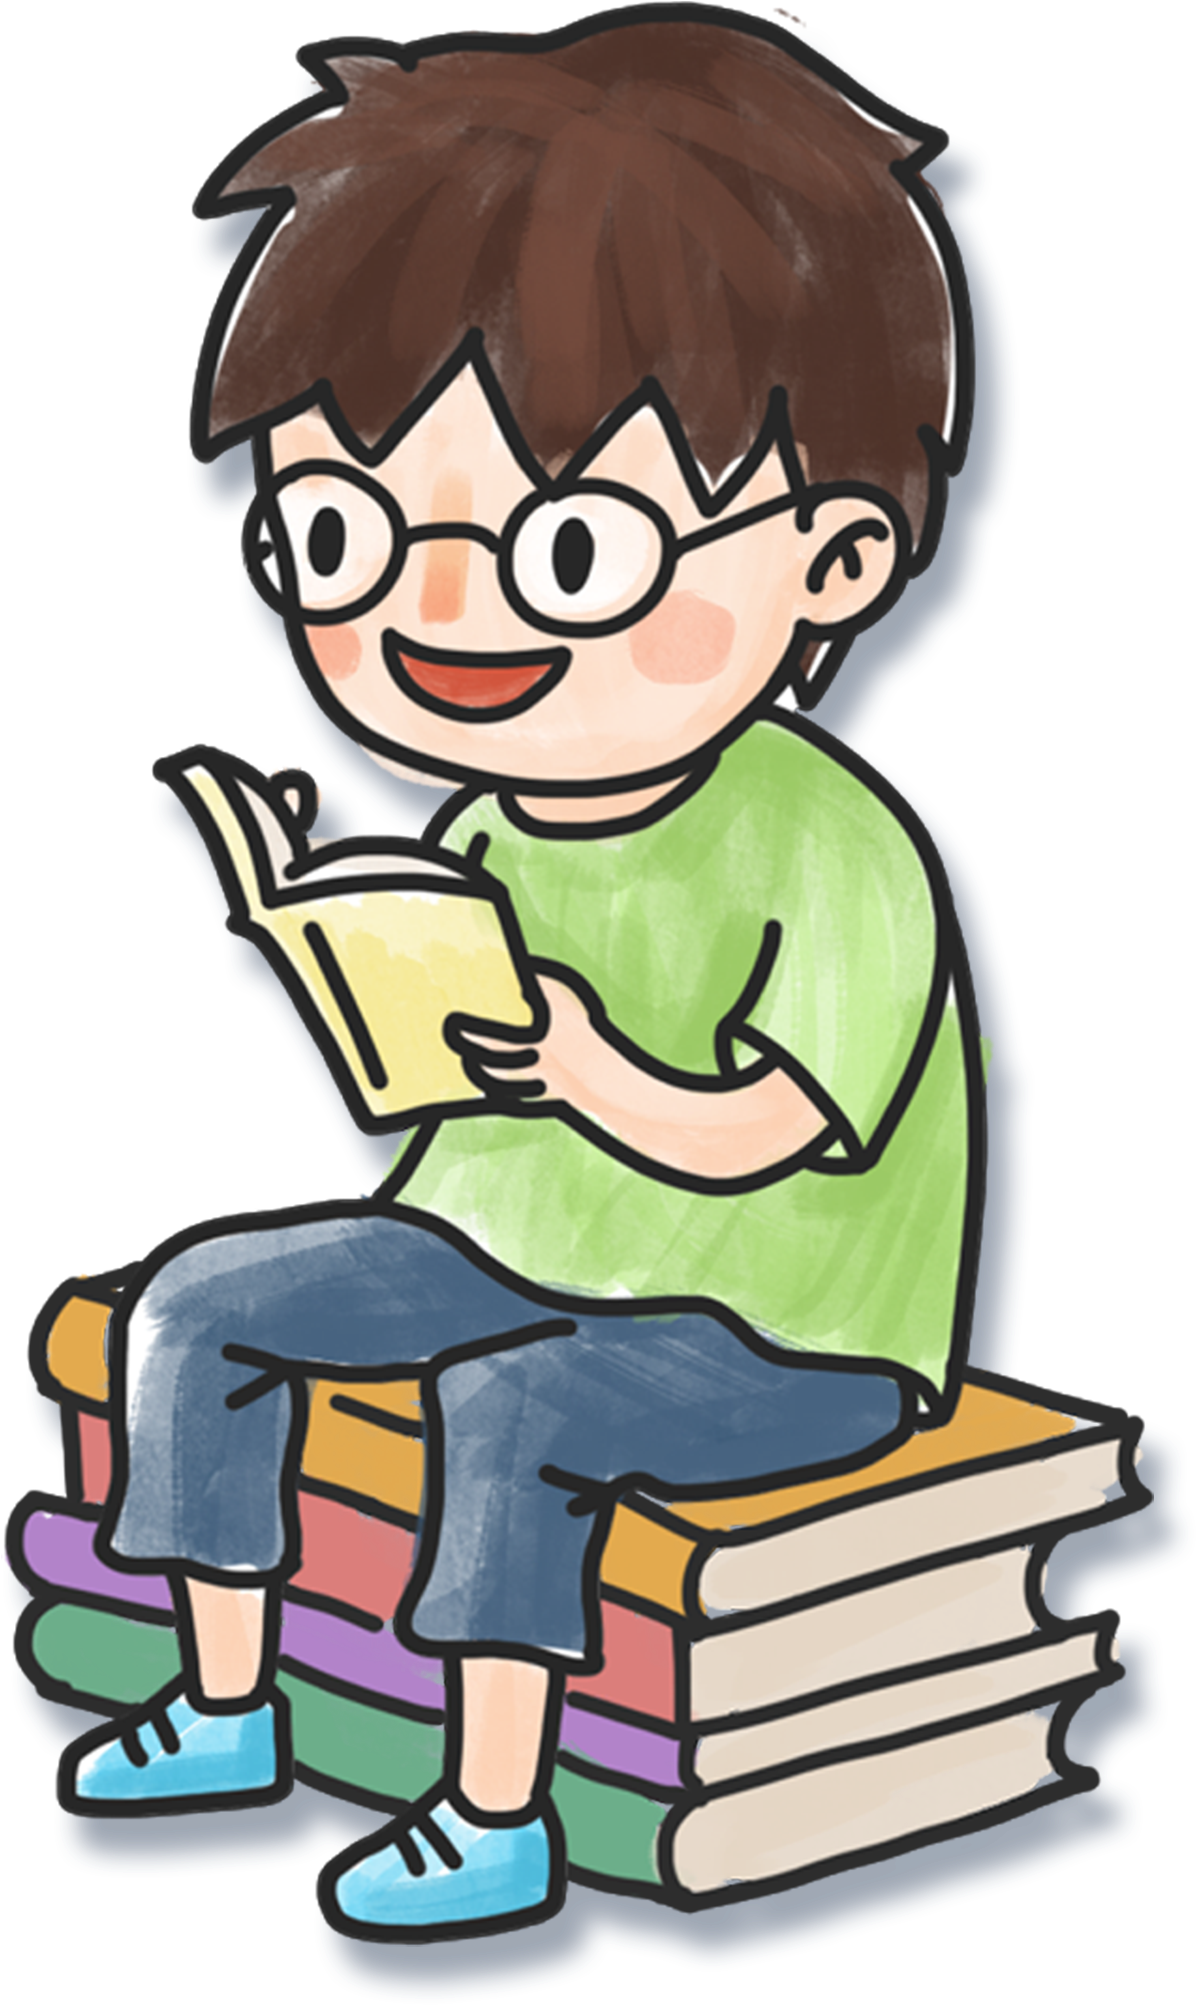 Hand Drawn Cartoon Boy Reading Book Decoration Png Clipart